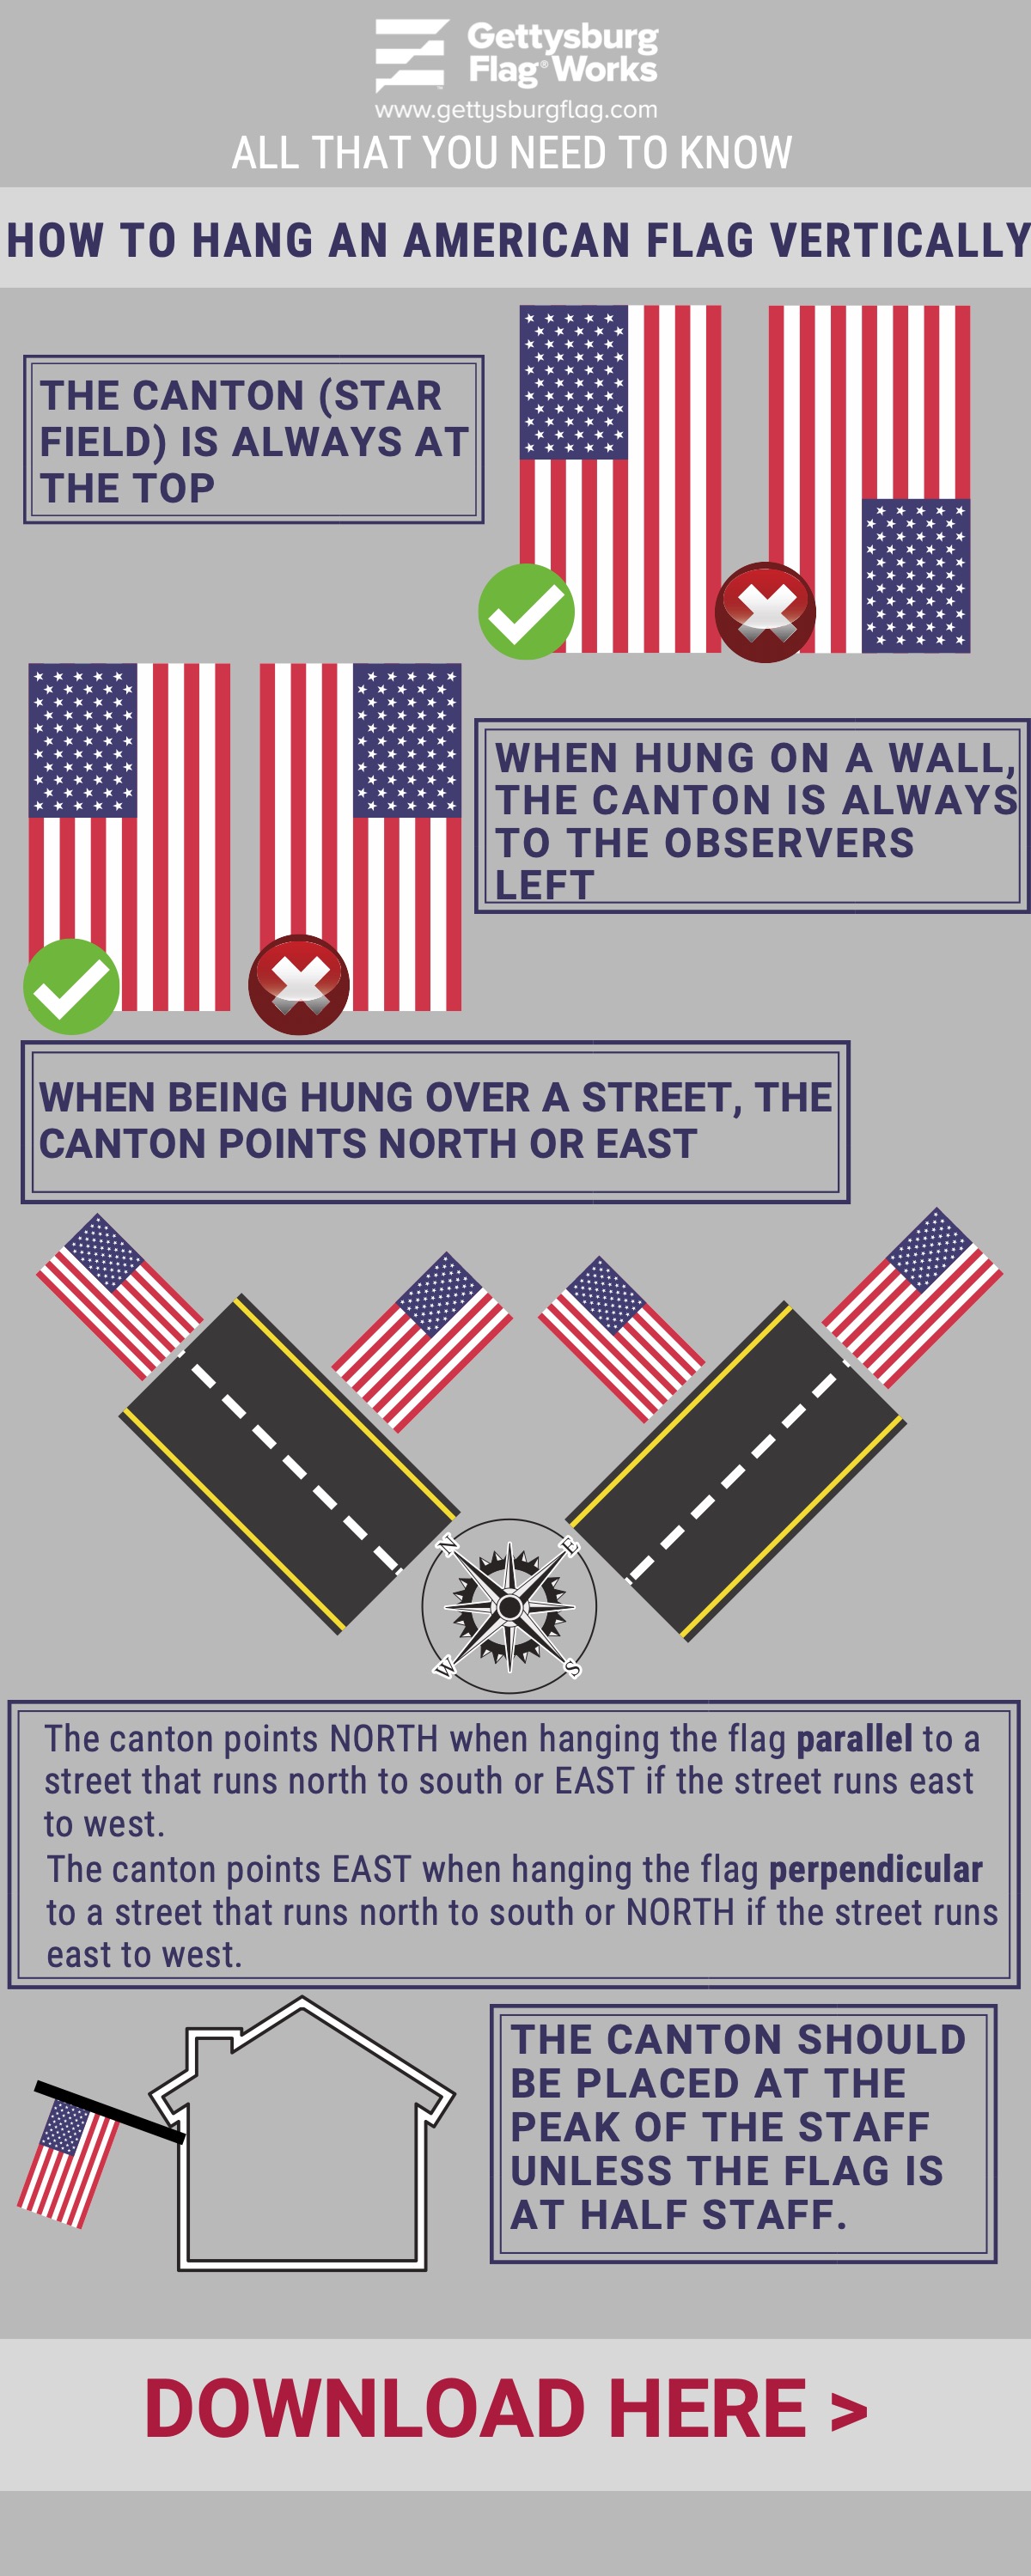 Flag Display Order Infographic